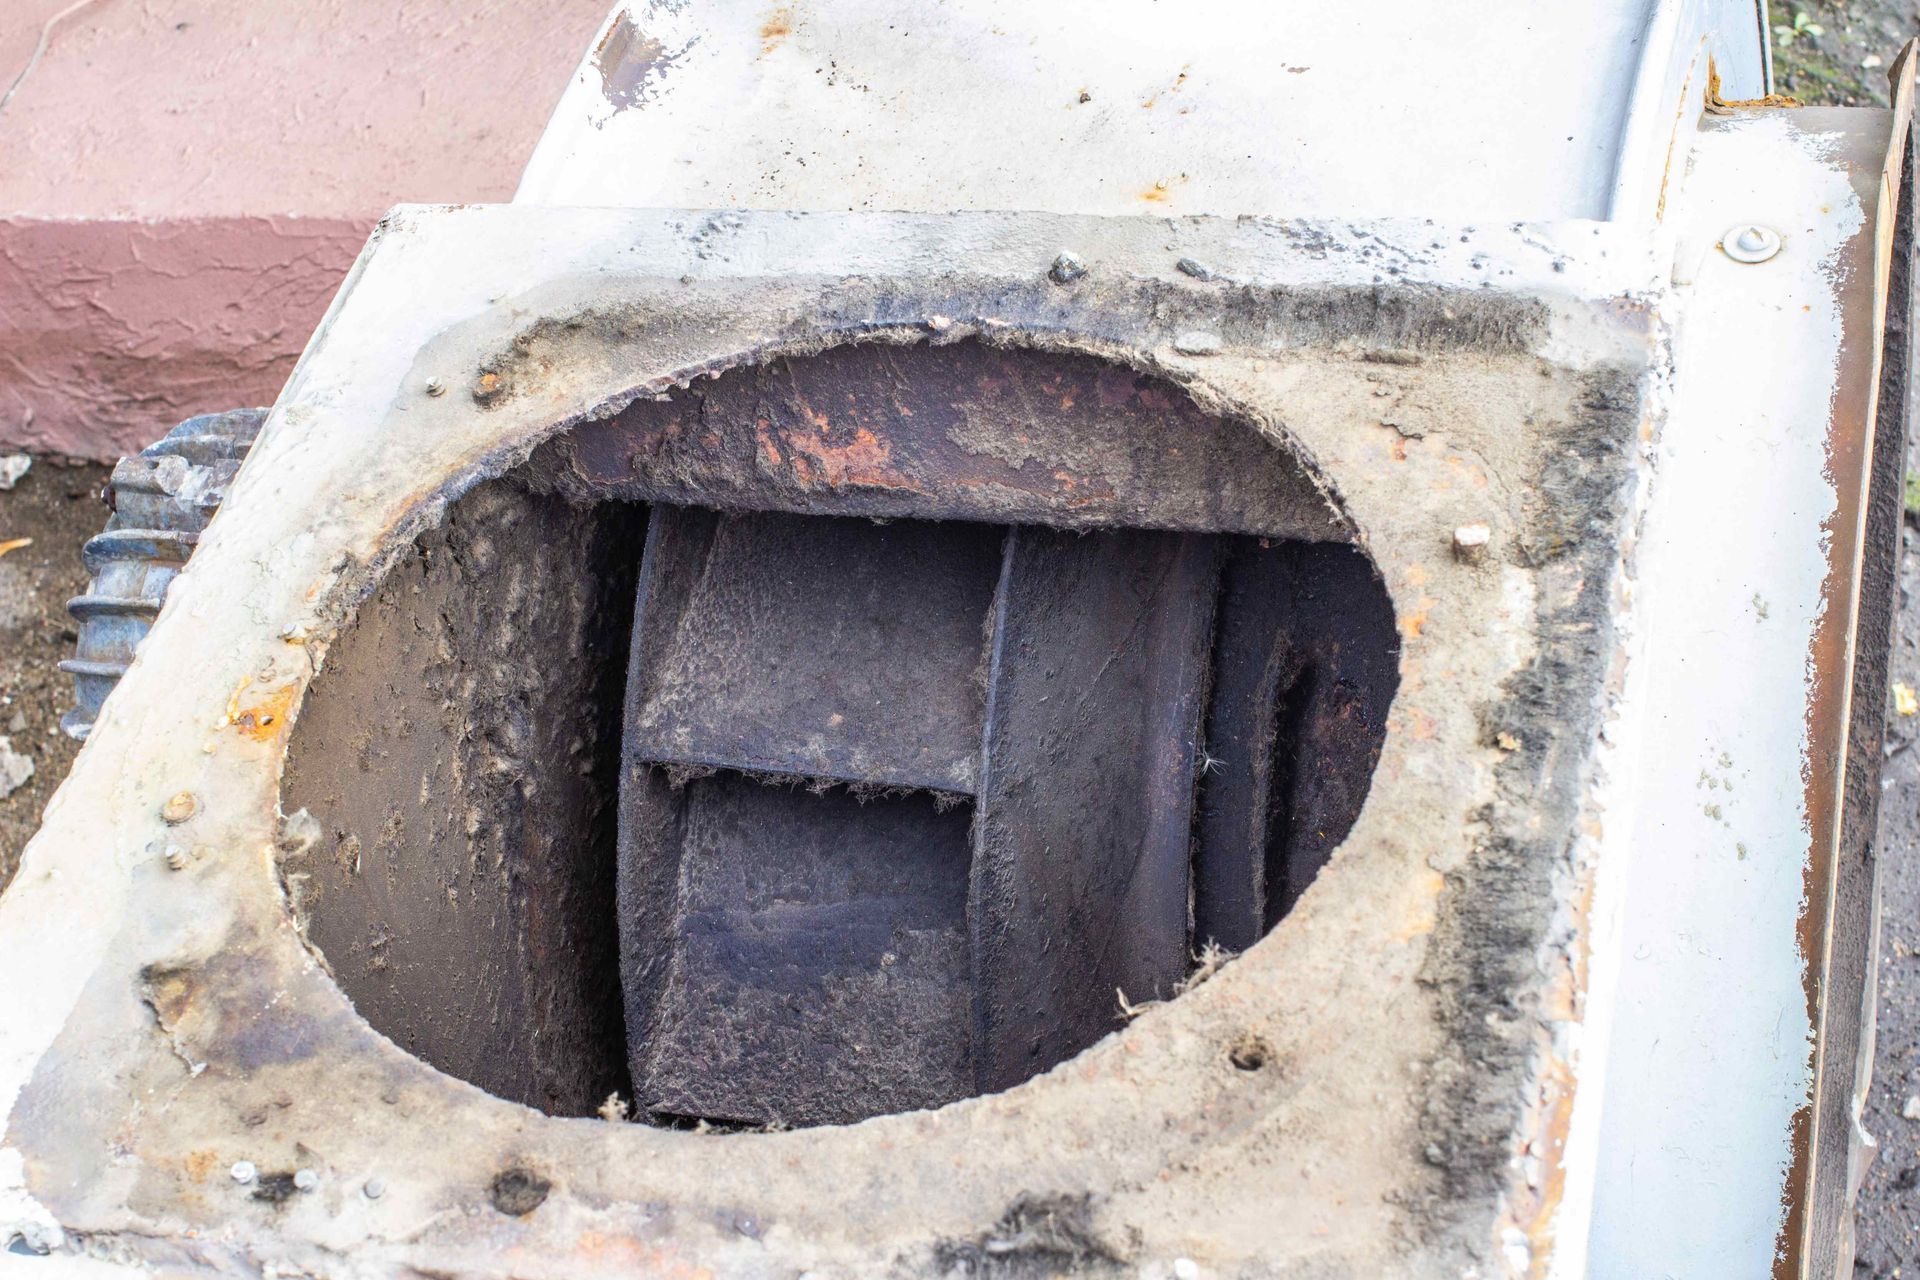 A filthy air duct